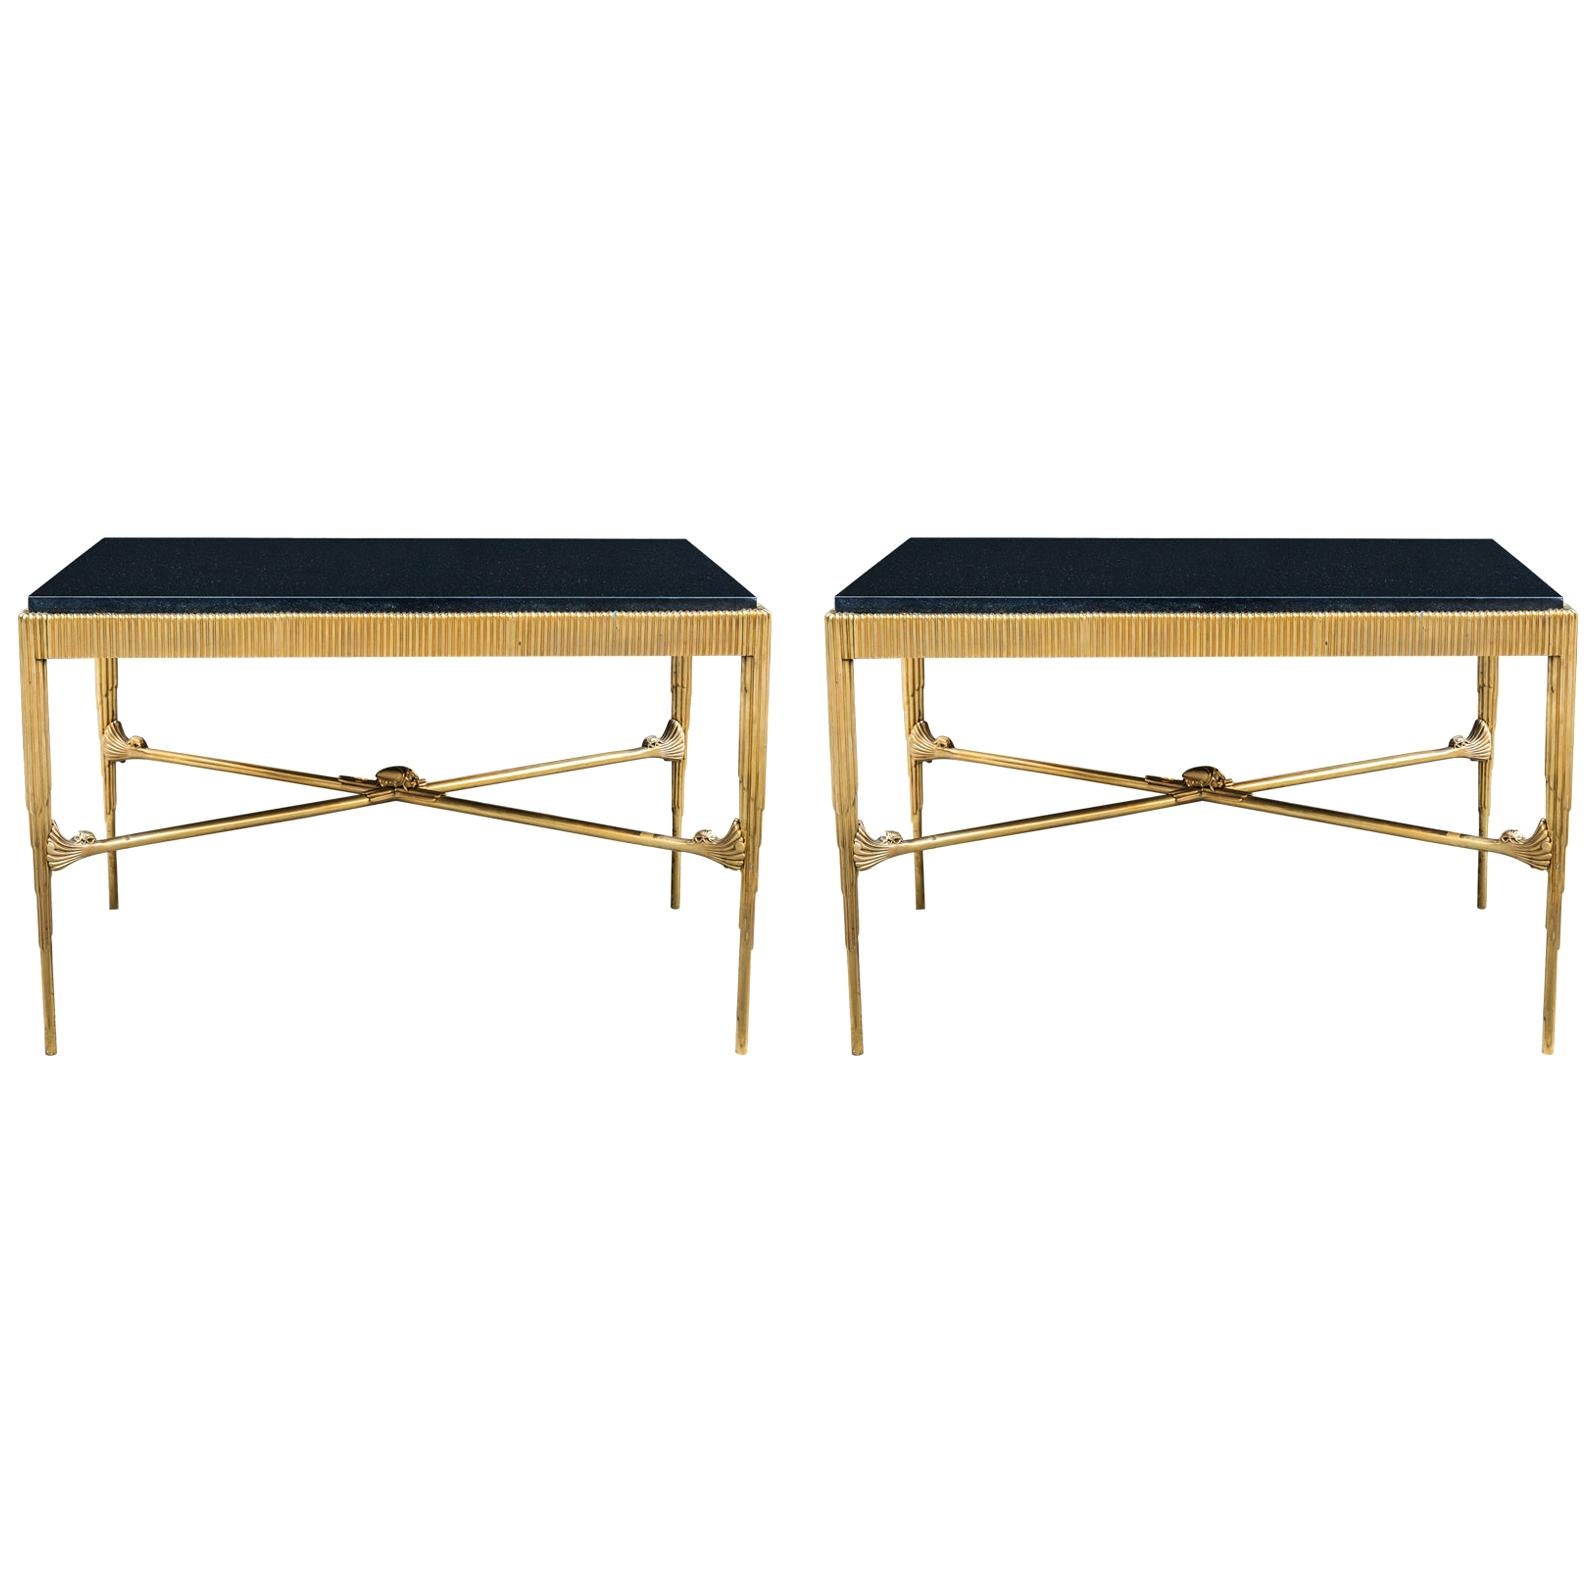 In the style of Armand-Albert Rateau, Pair of Tables, France, circa 1990